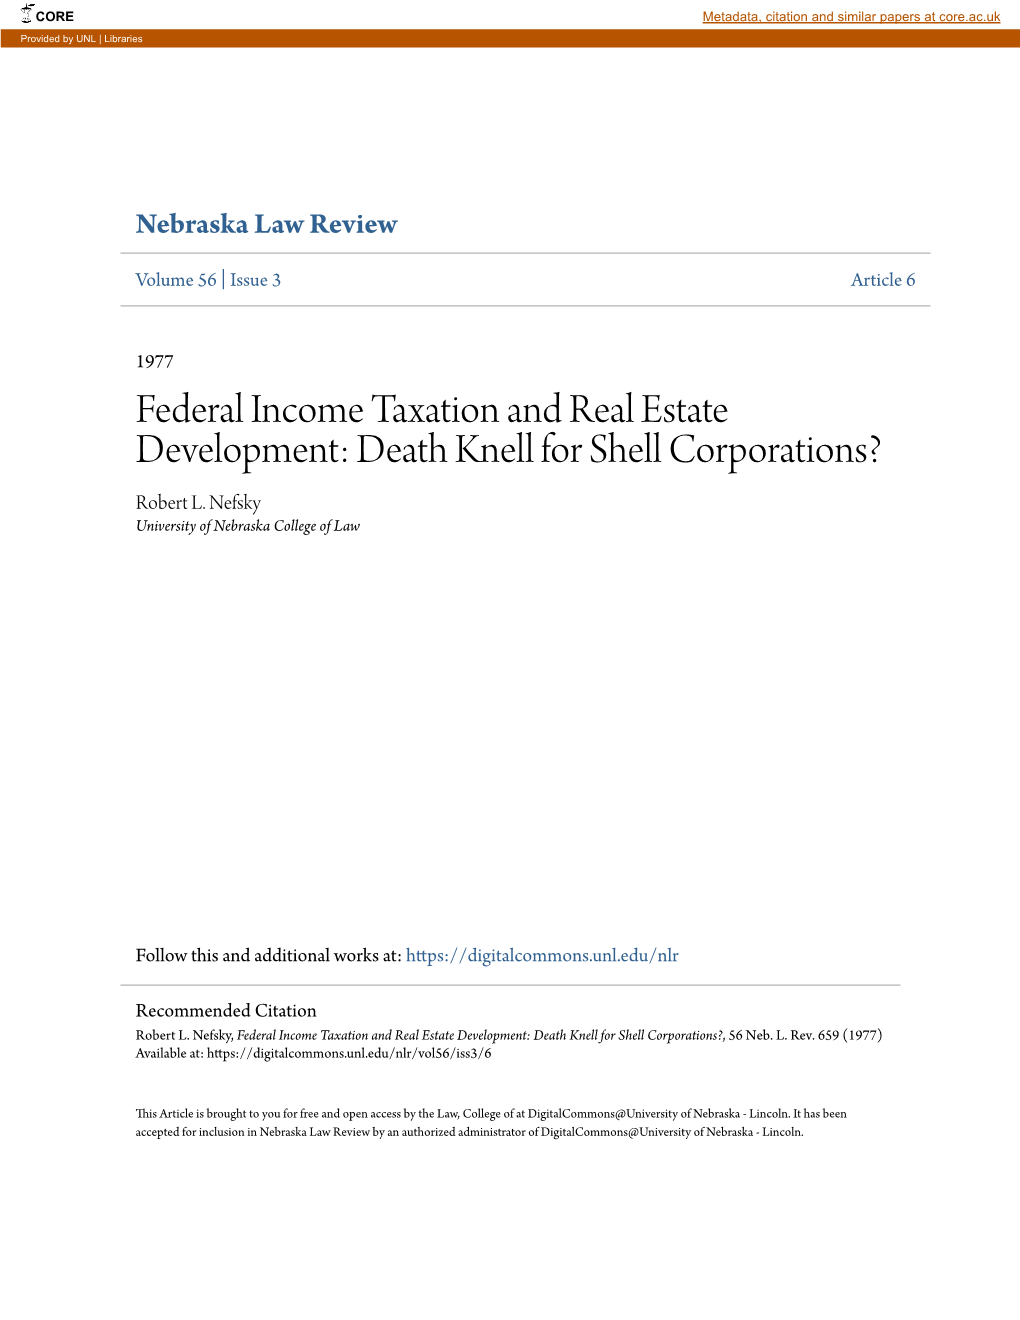 Federal Income Taxation and Real Estate Development: Death Knell for Shell Corporations? Robert L